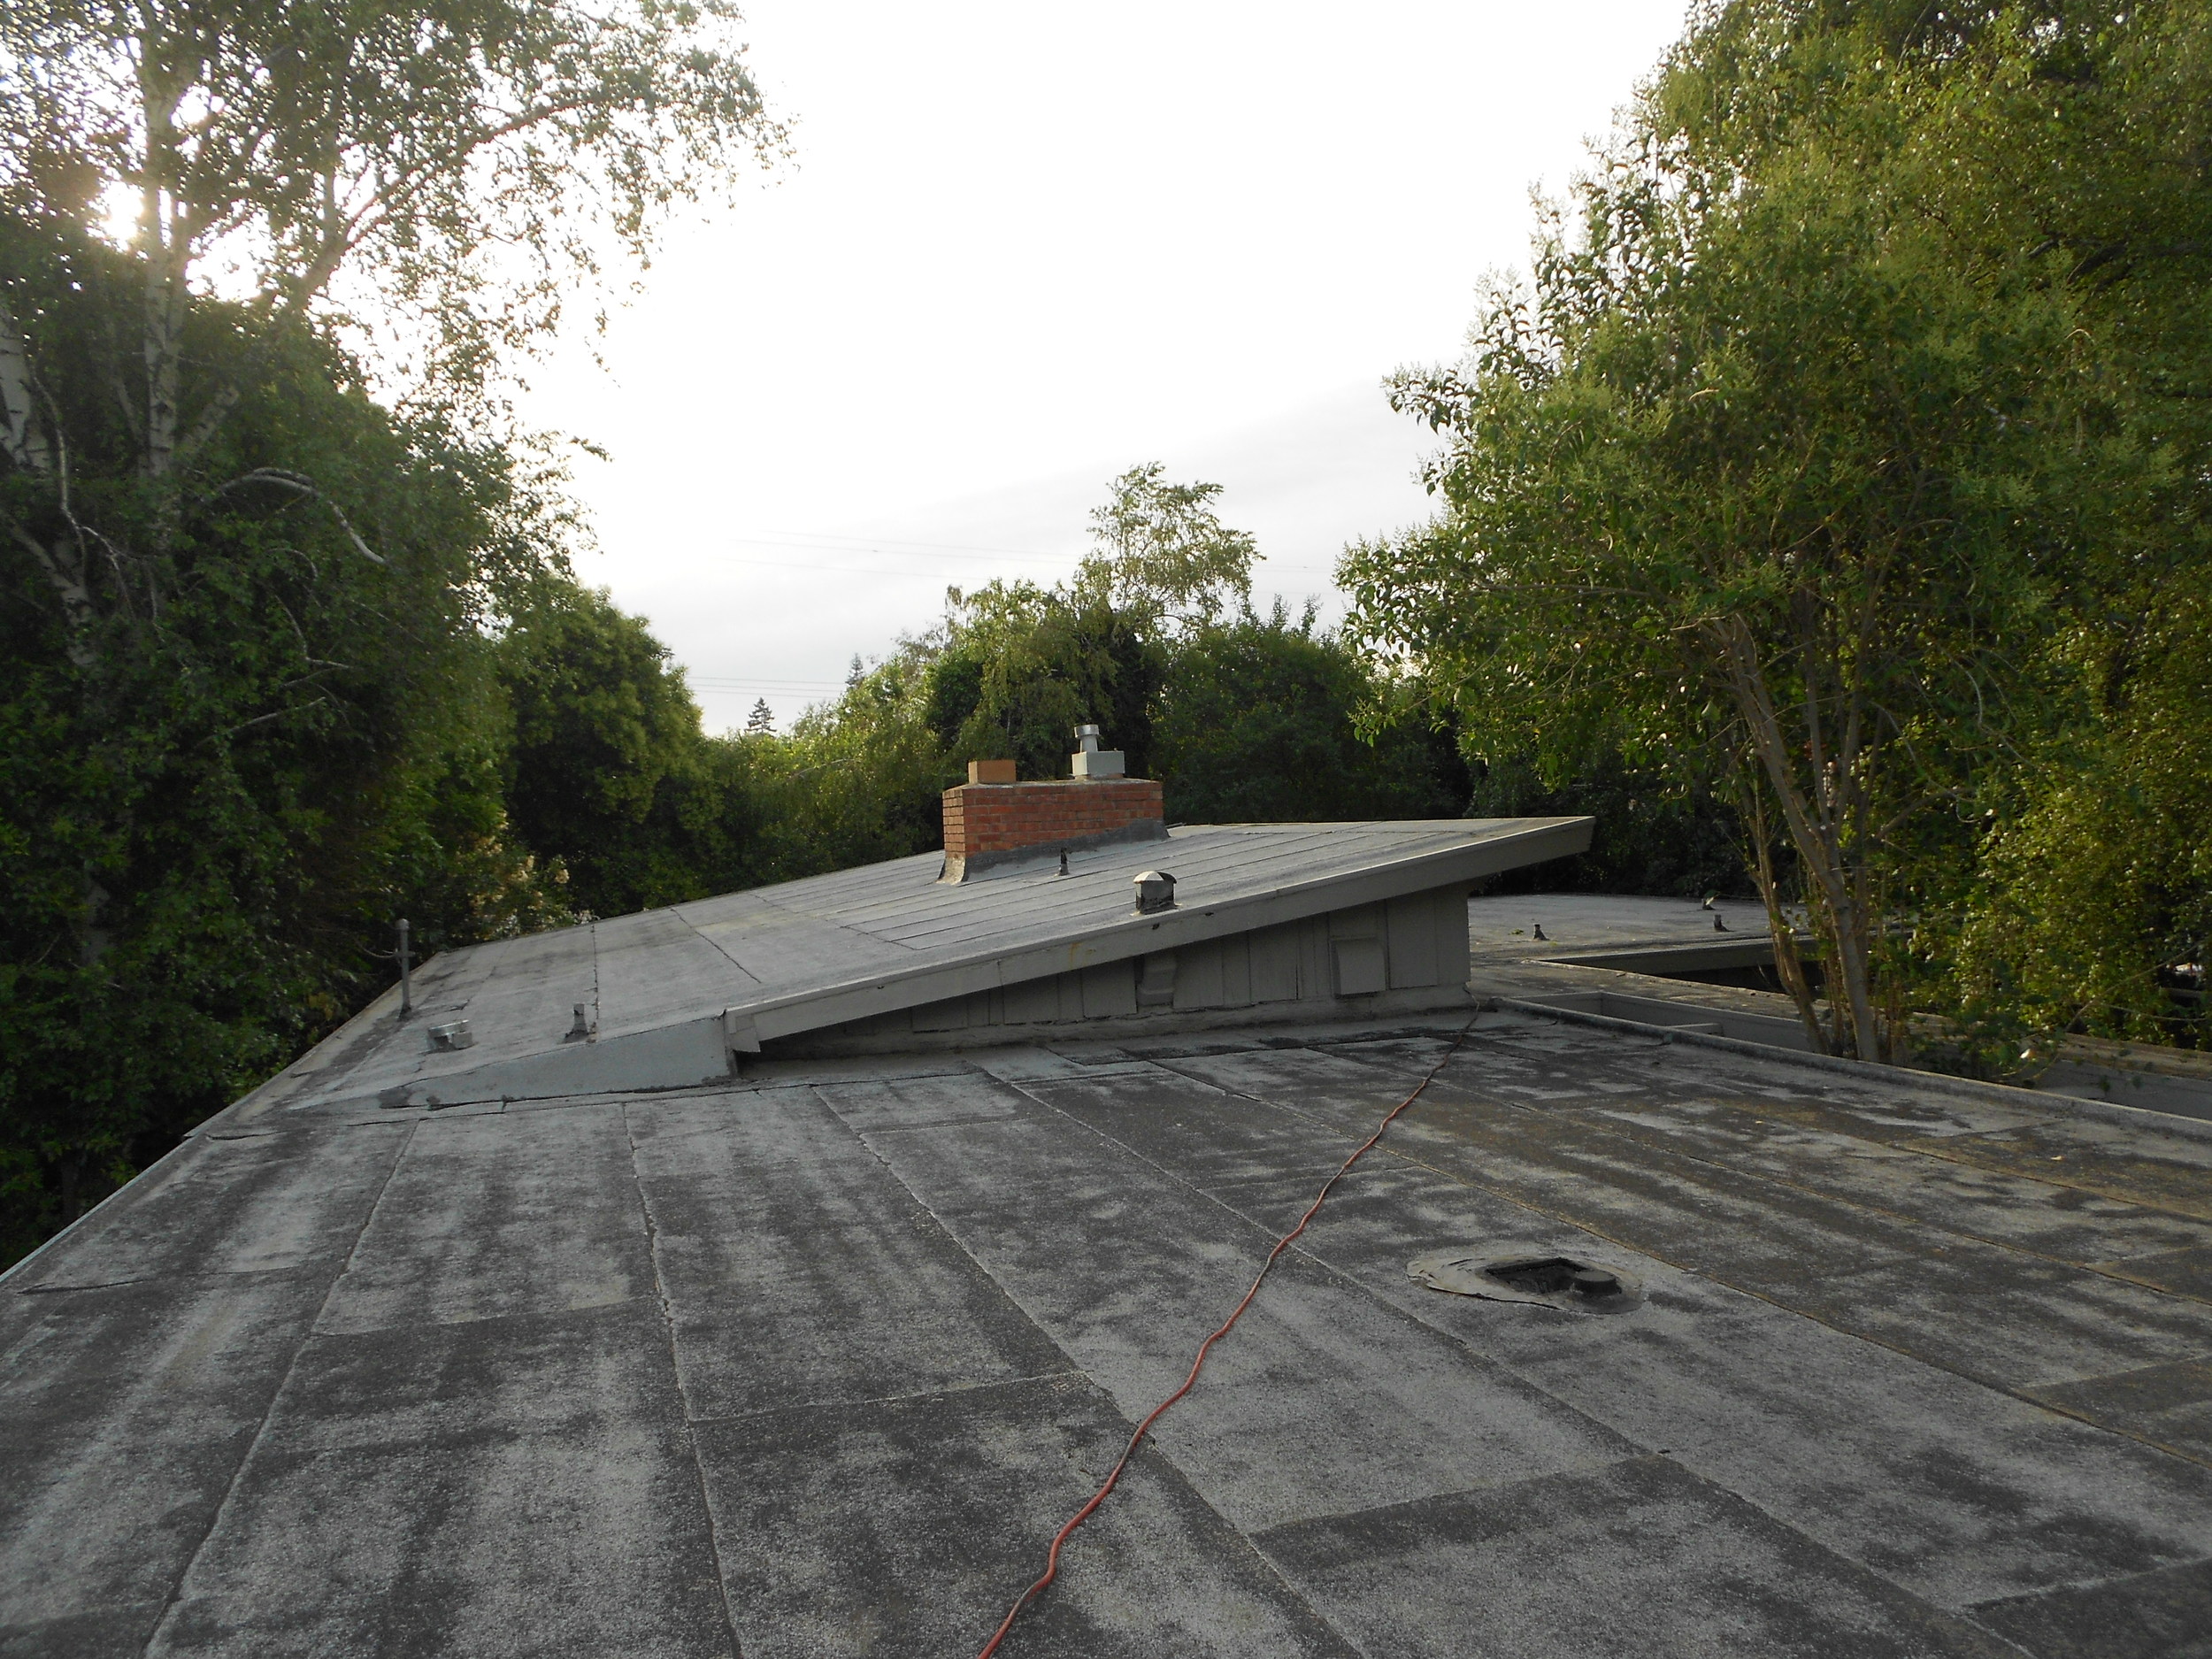 Completed Foam & Coatings Project by Ved's Roofing of Yuba City, CA.